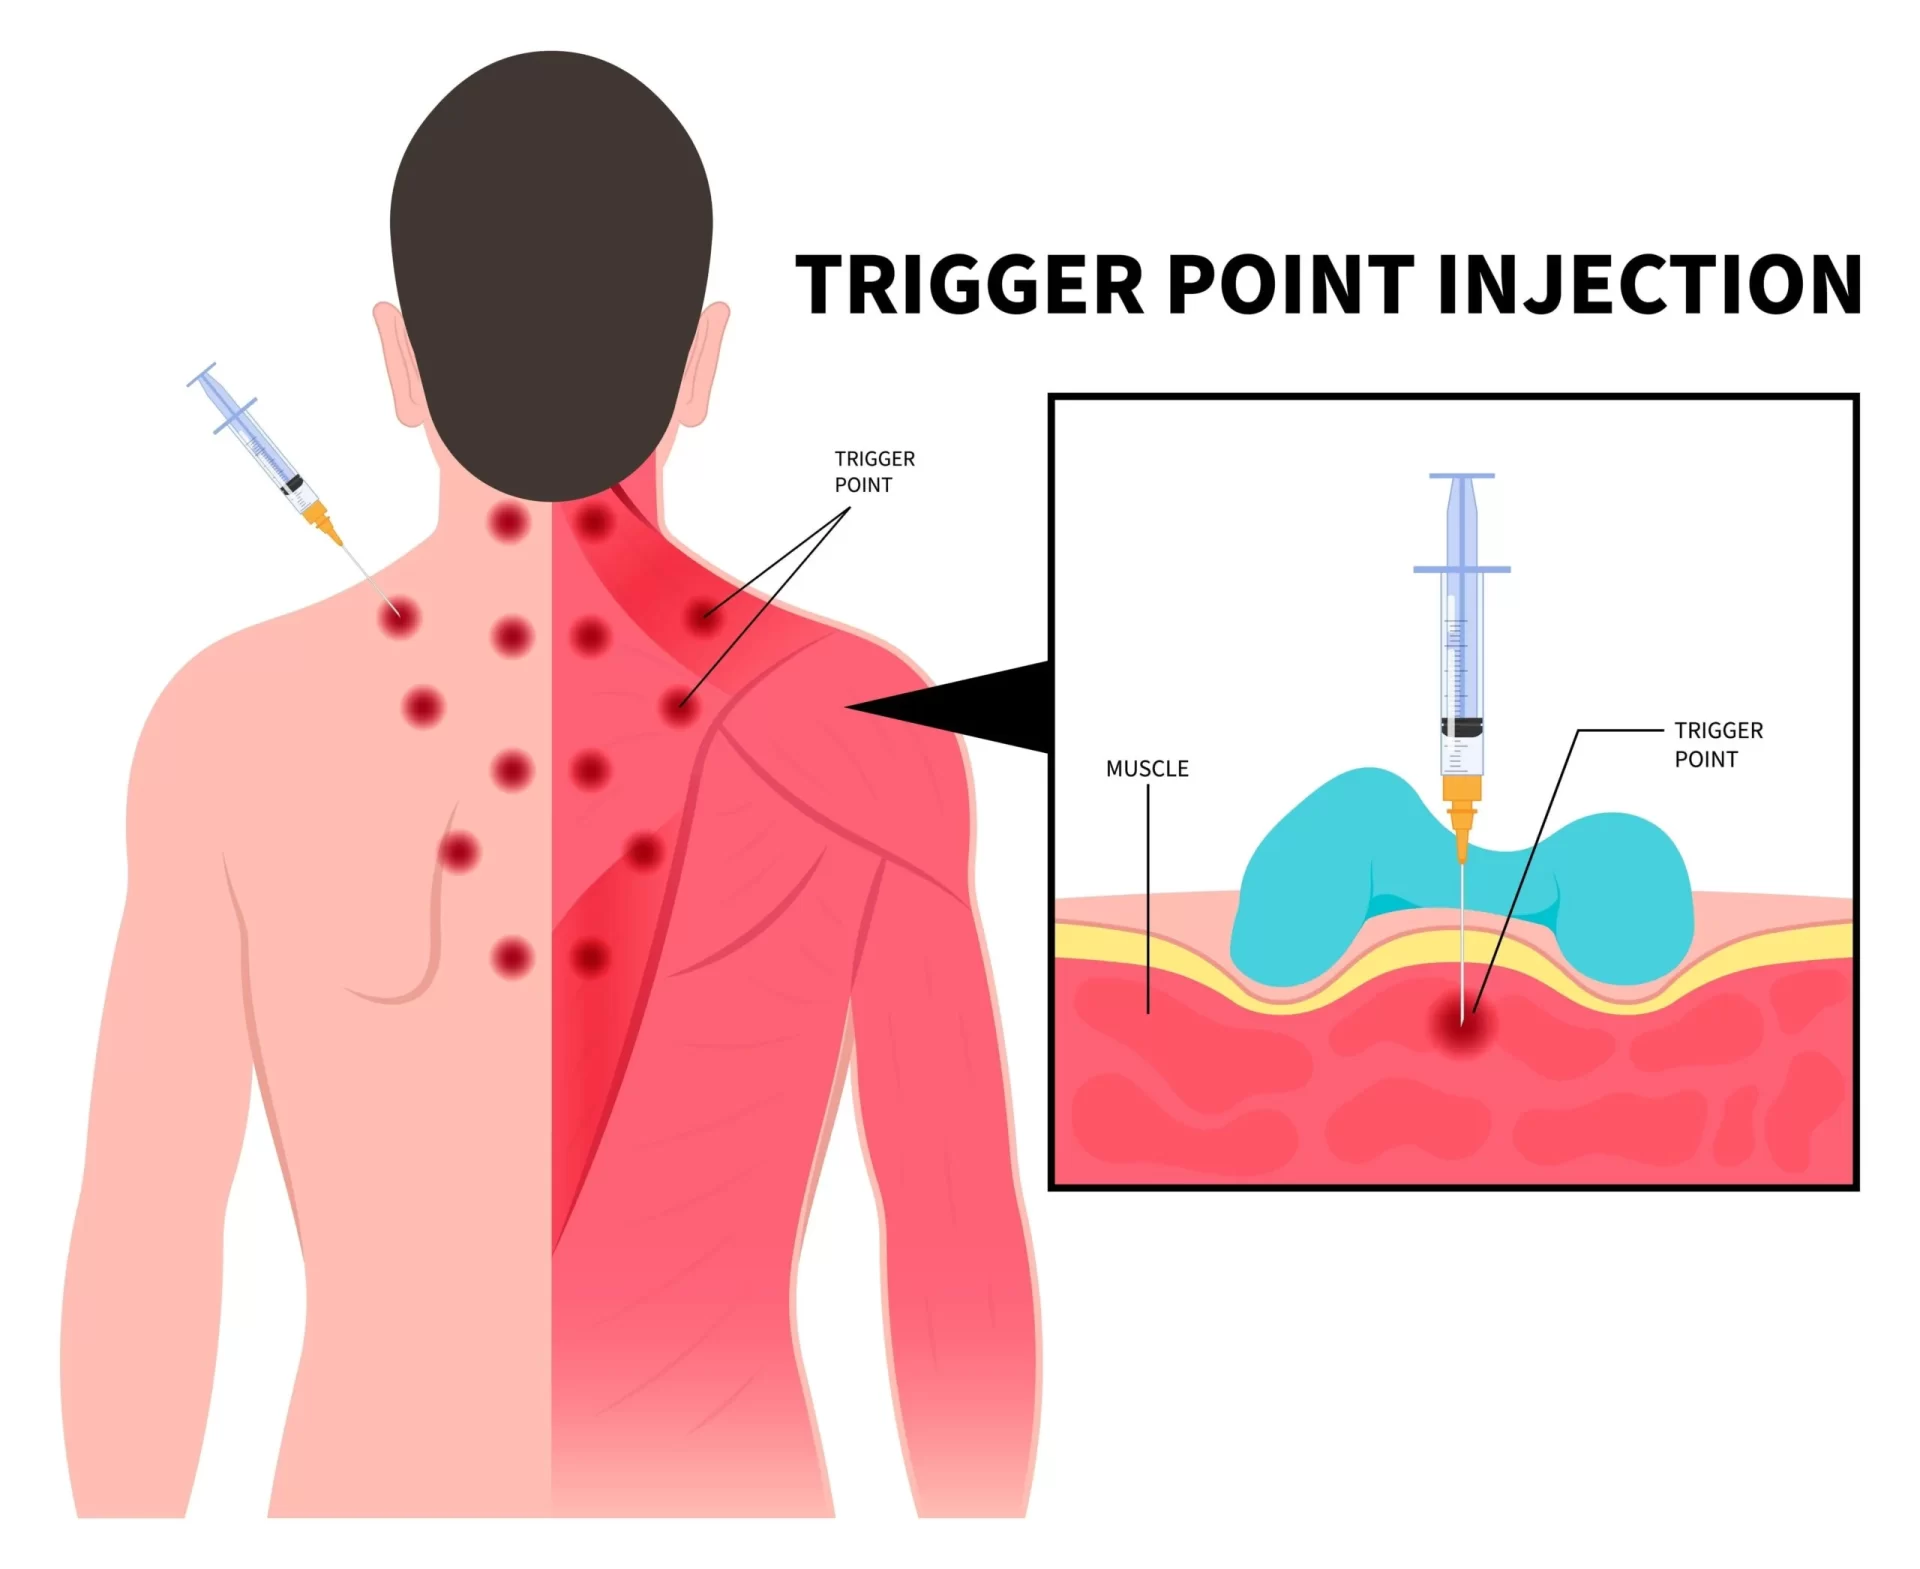 Trigger Point injections